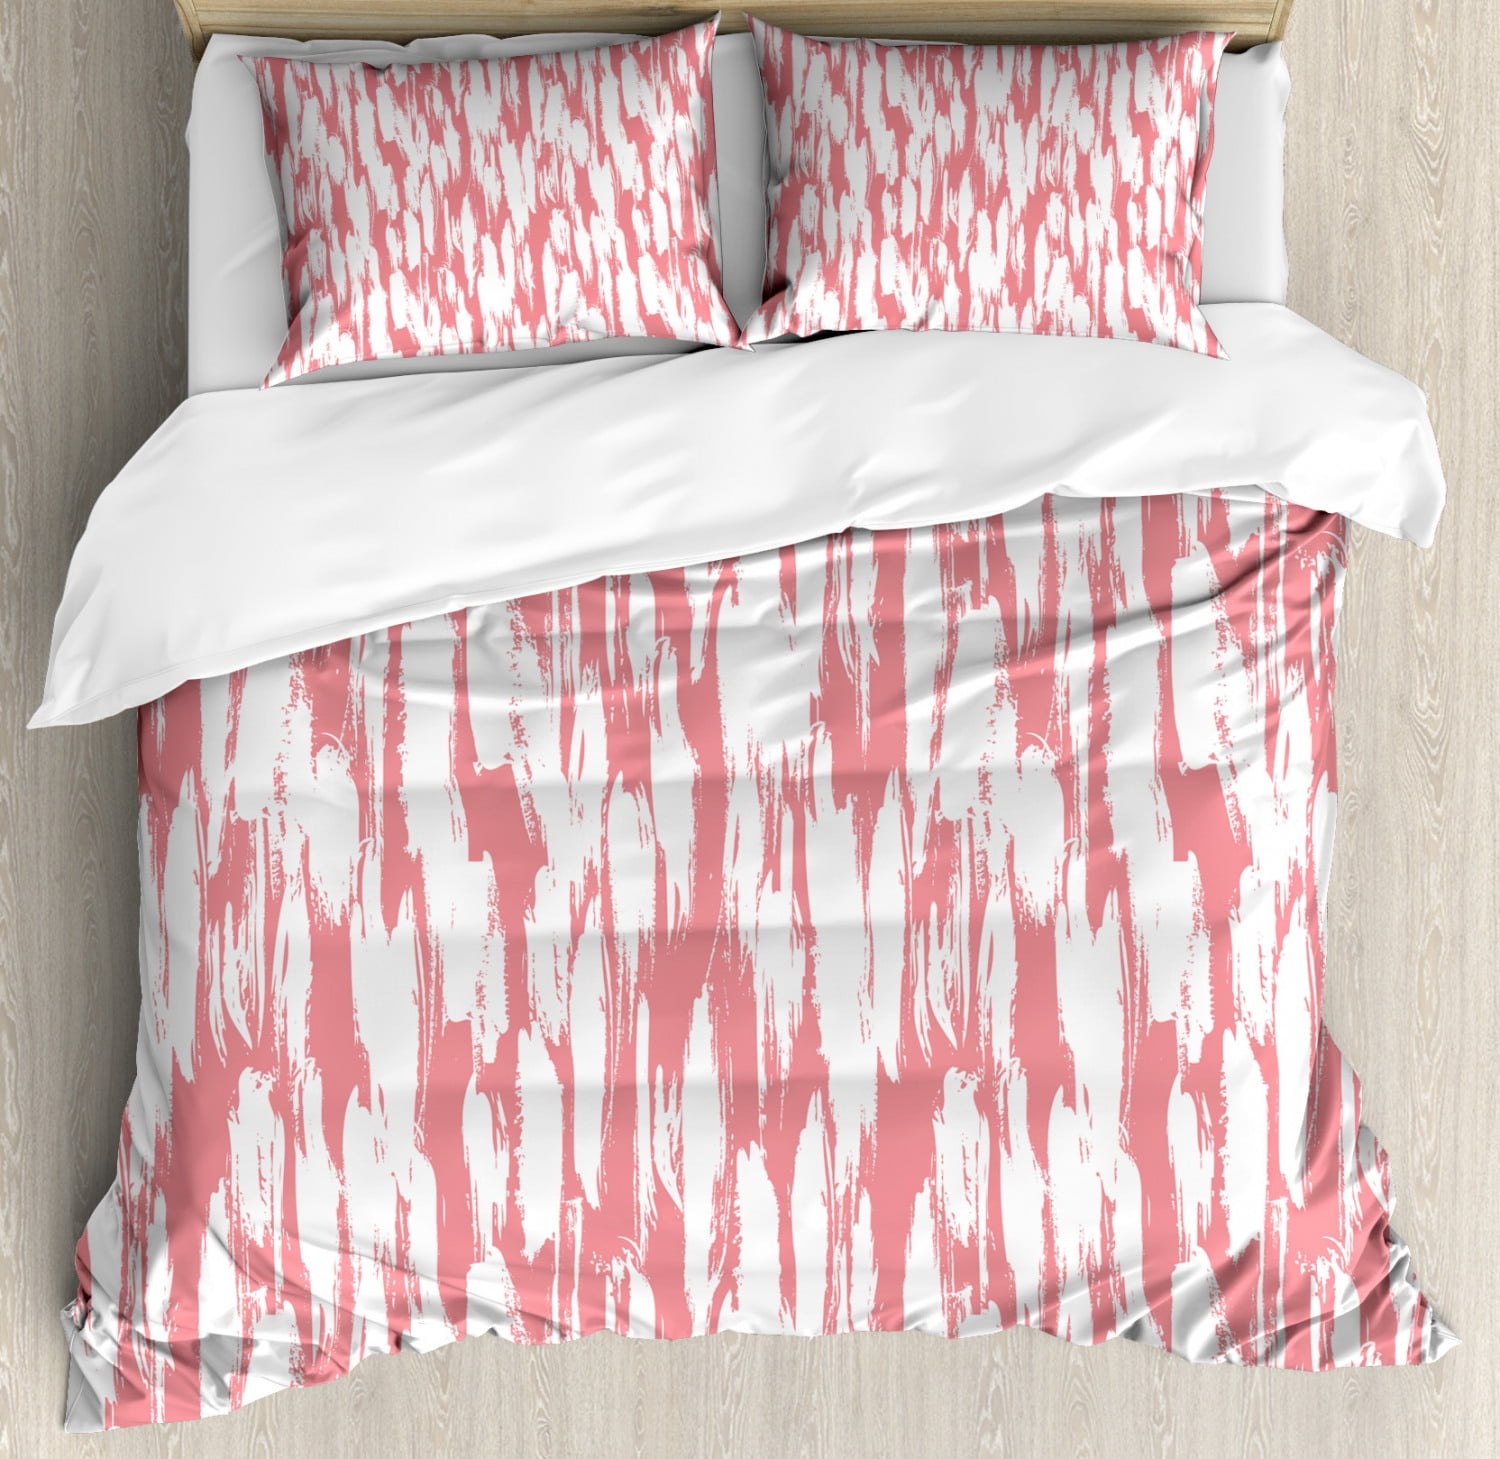 Abstract King Size Duvet Cover Set Hipster Style Inspirations